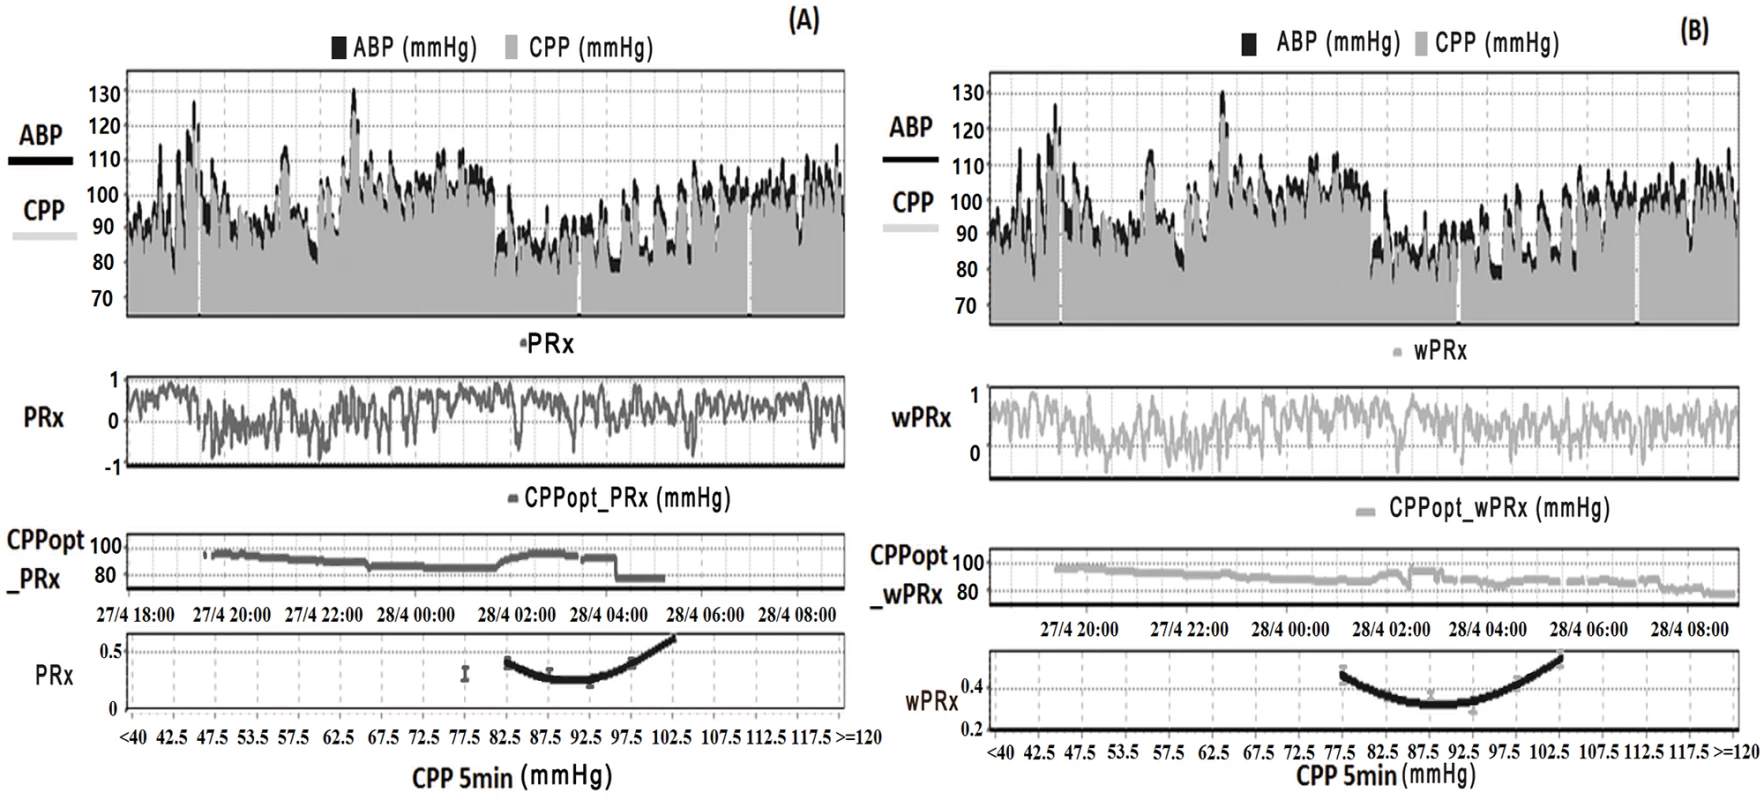 Example of data analysis using ICM+, showing time trends of arterial blood pressure (ABP), cerebral perfusion pressure (CPP), cerebral autoregulation (CA), and optimal CPP (CPPopt).